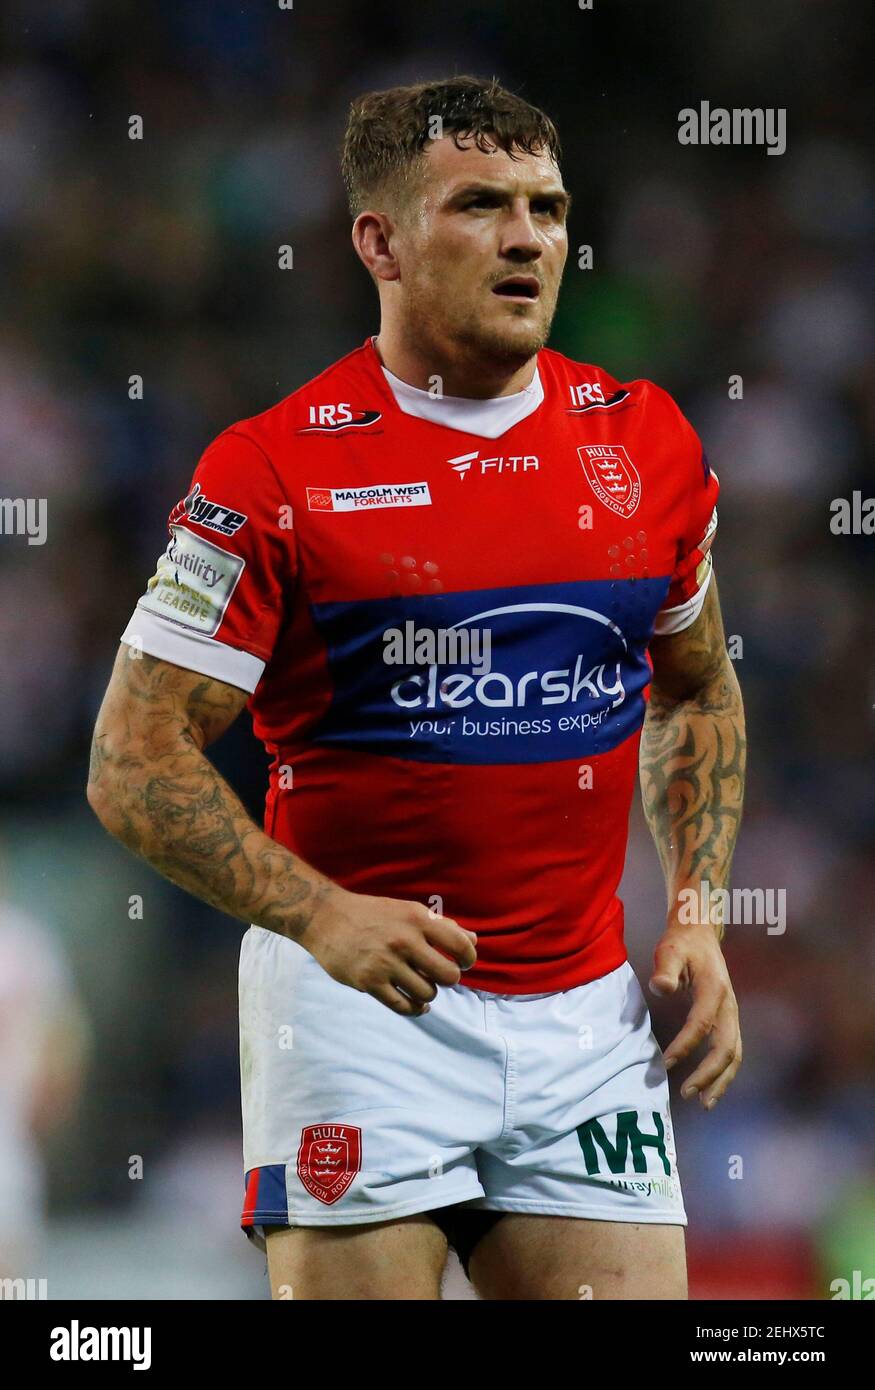 Rugby League - St Helens v Hull Kingston Rovers - First Utility Super League - Langtree Park - 24/7/15 Ben Cockayne of Hull Kingston Rovers Mandatory Credit: Action Images / Ed Sykes  EDITORIAL USE ONLY. Stock Photo